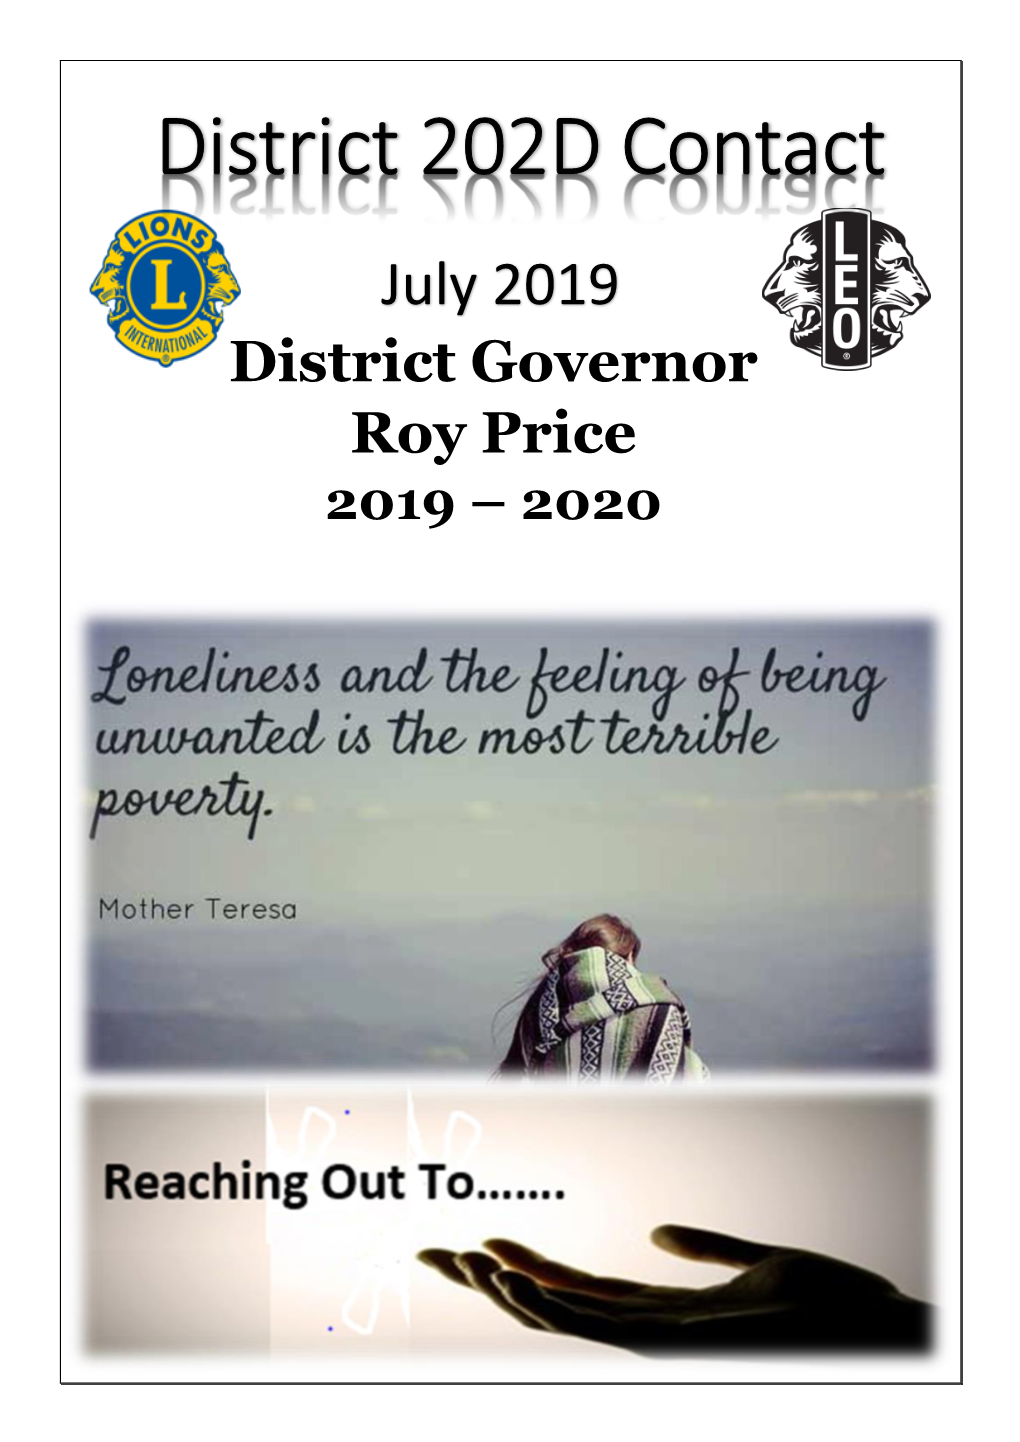 District 202D Contact July 2019 District Governor Roy Price 2019 – 2020